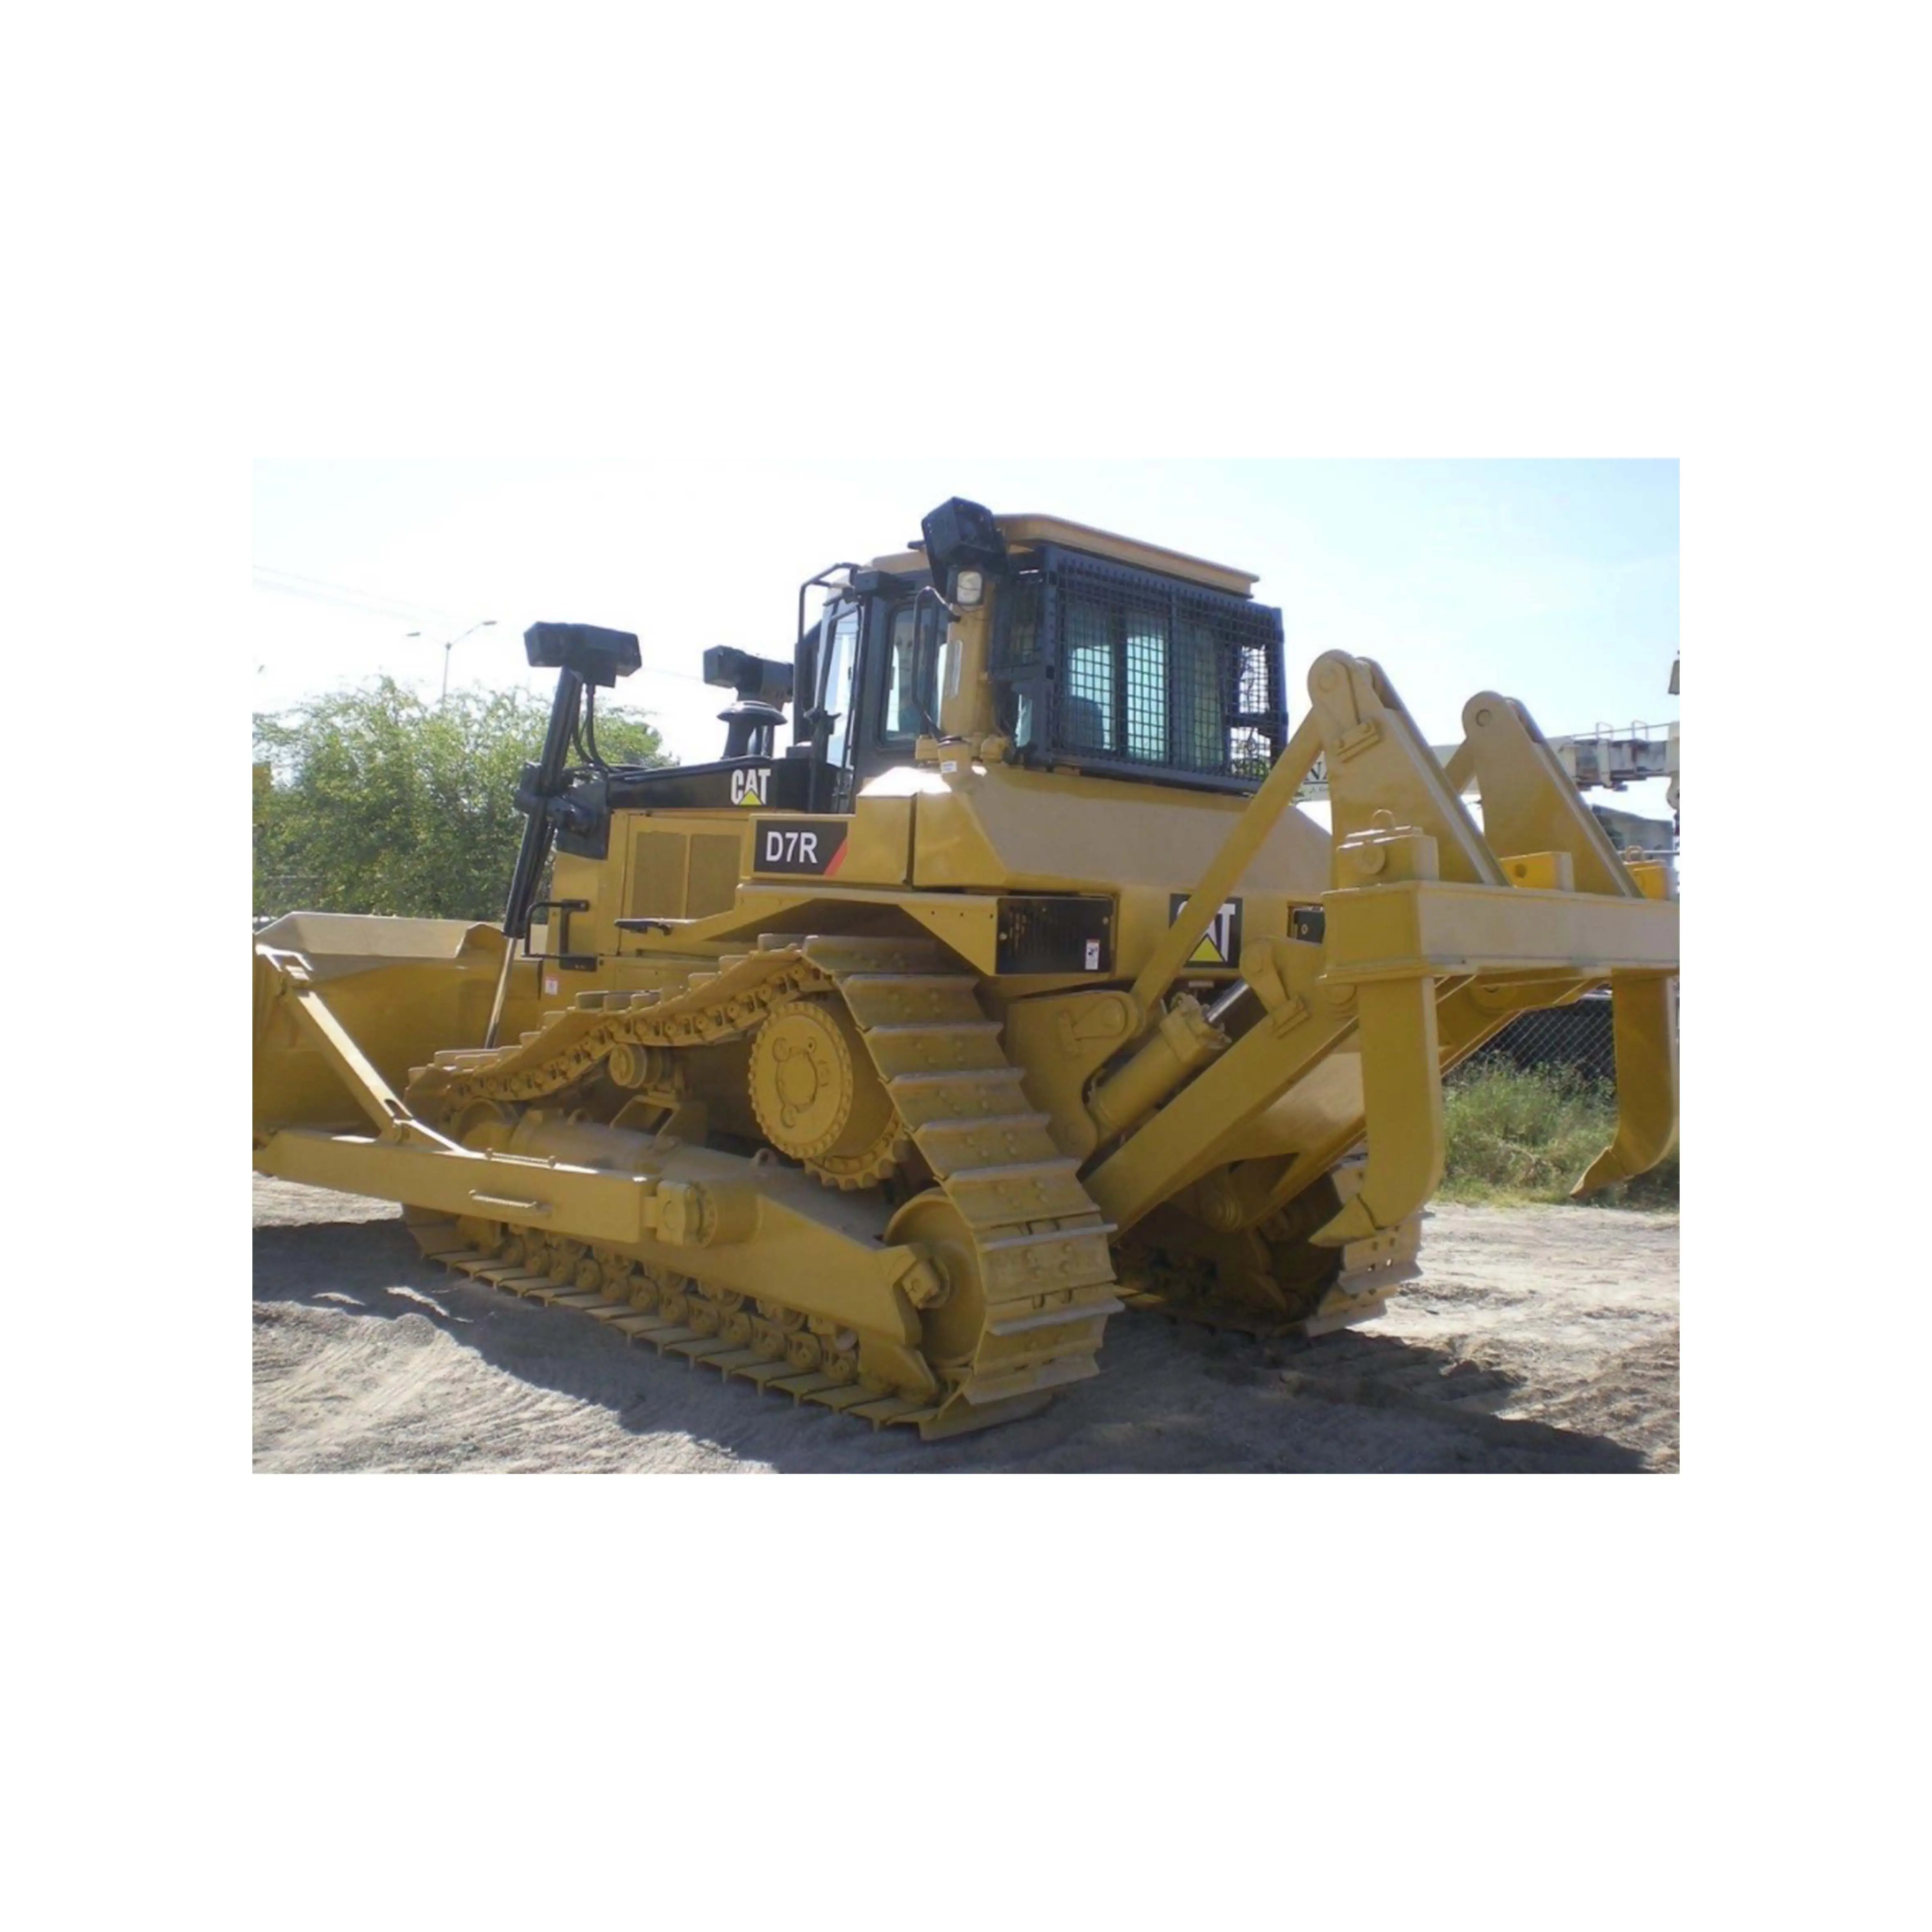 Original Used CAT D7R Bulldozer Rugged Reliability for Heavy Duty Operations Find Yours Cat D9R on sale